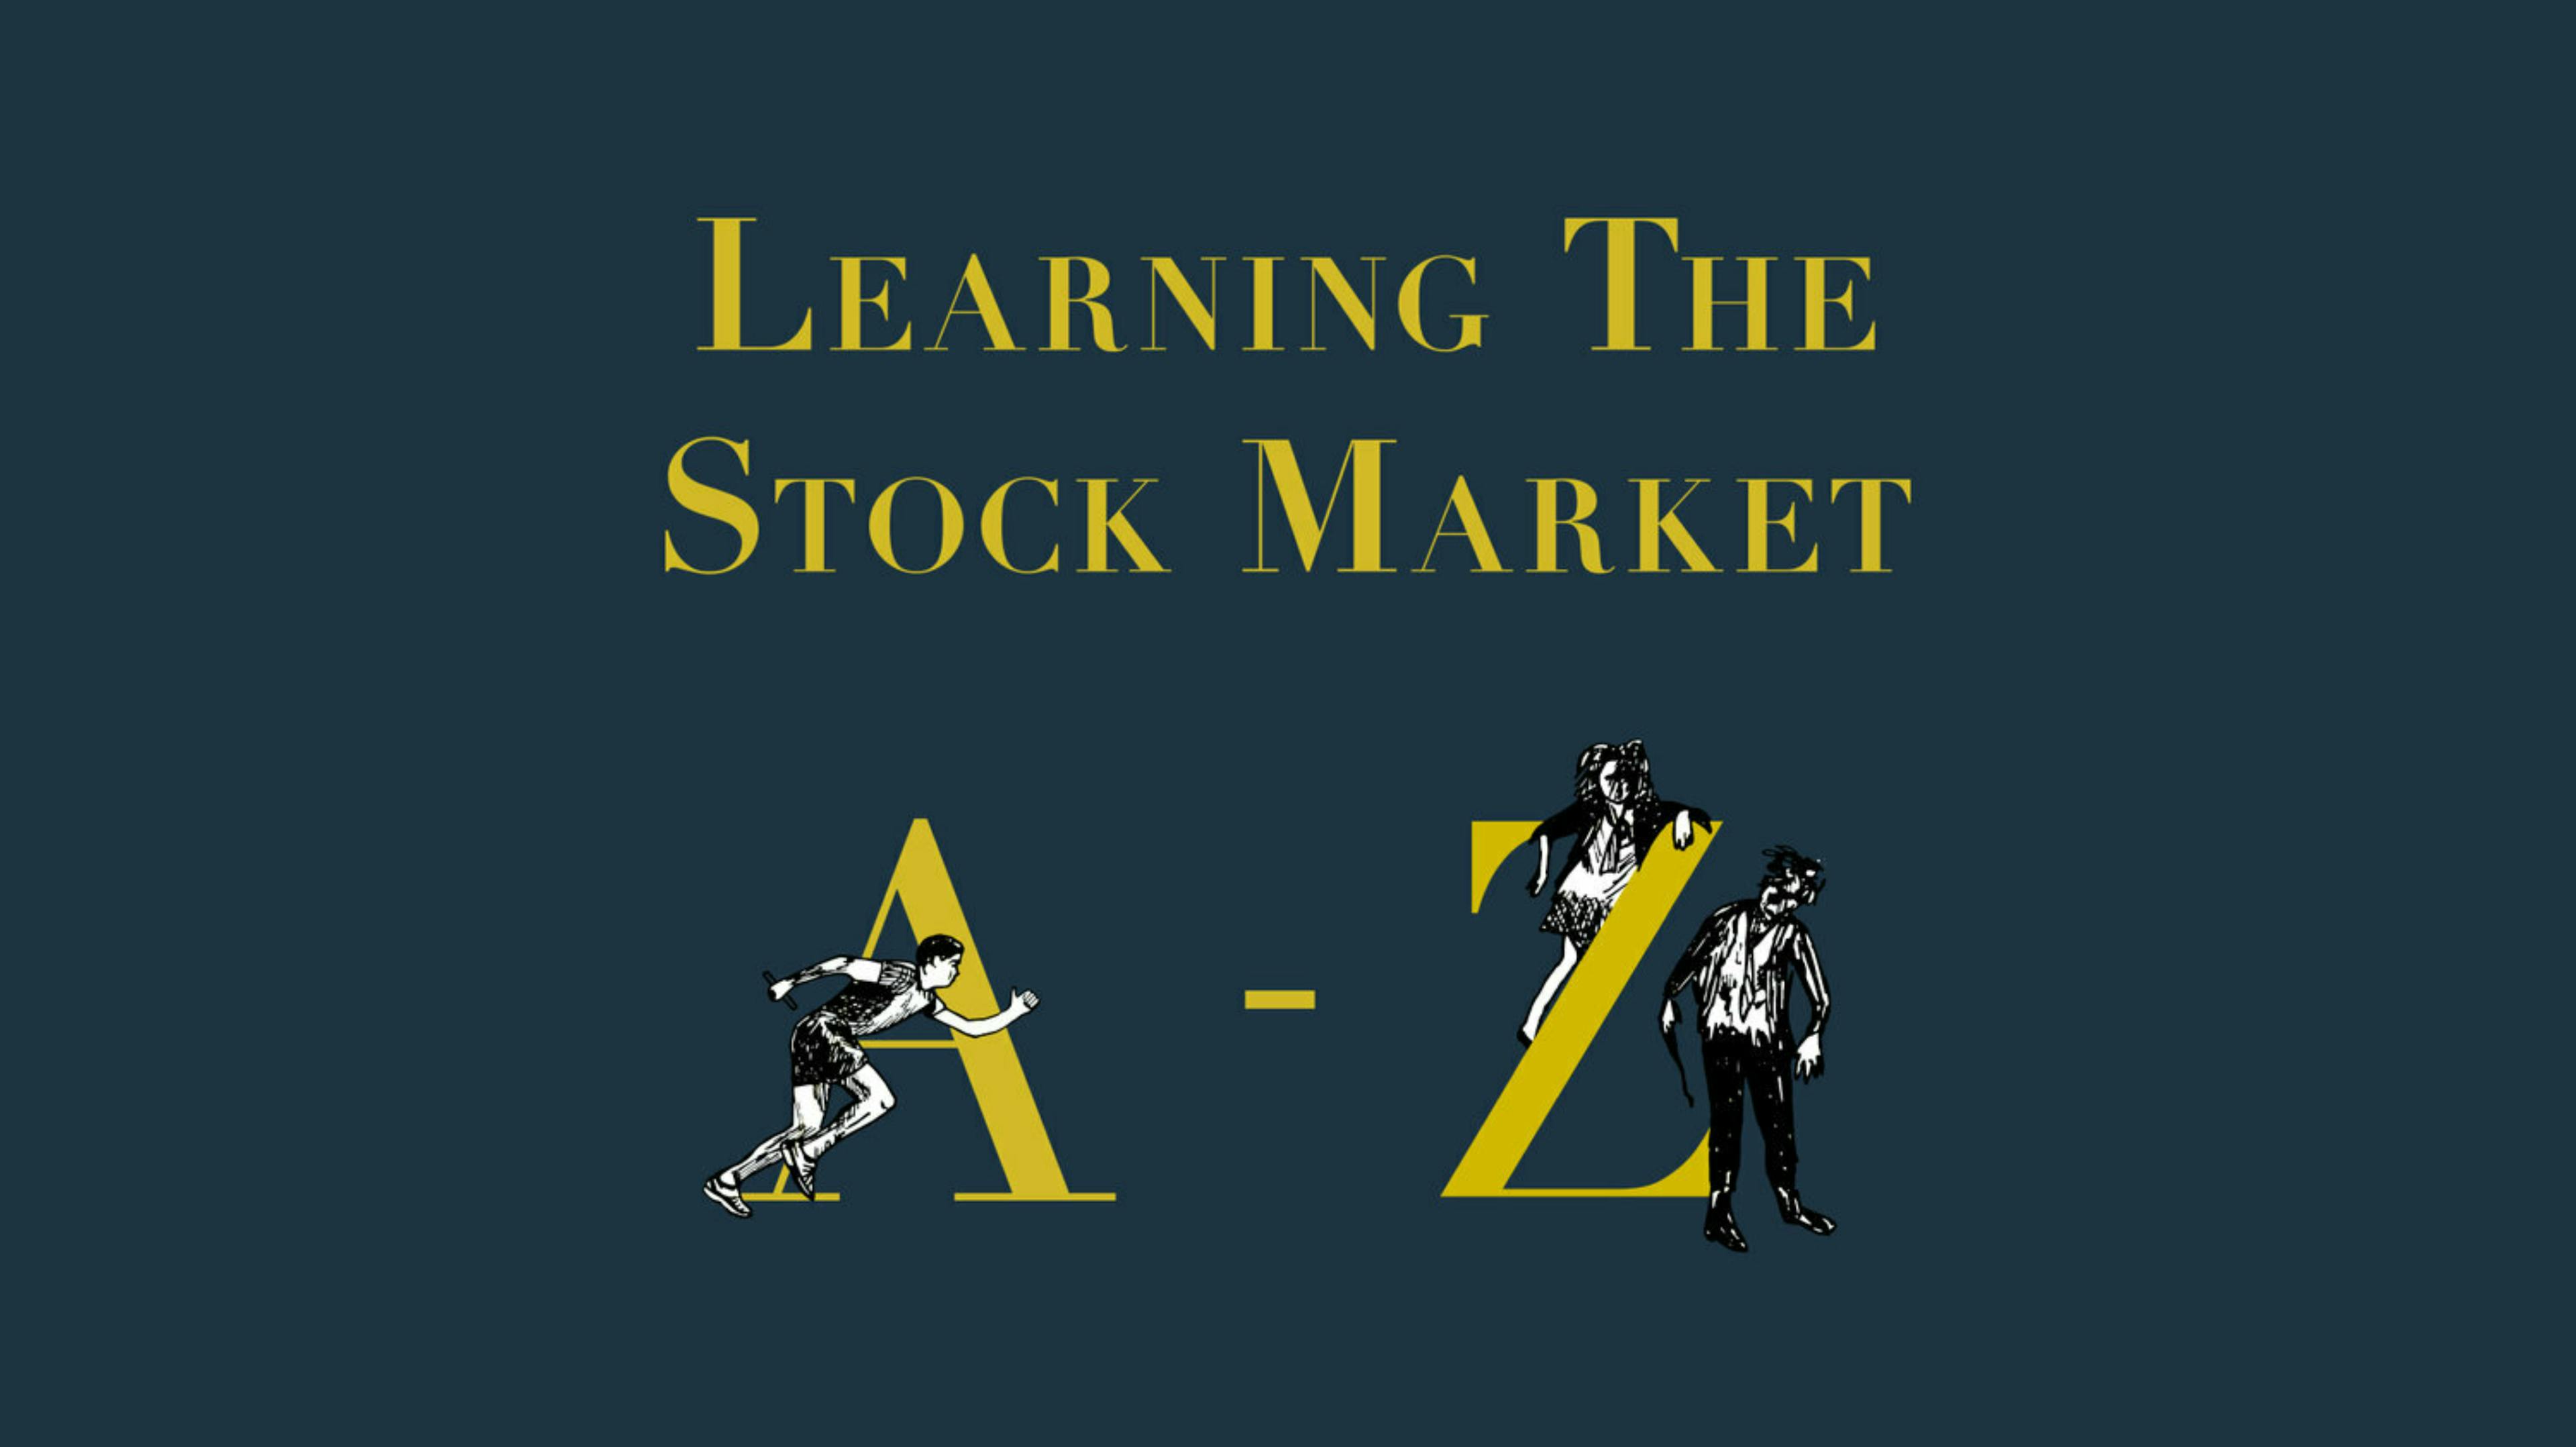 Learning The Stock Market A-Z